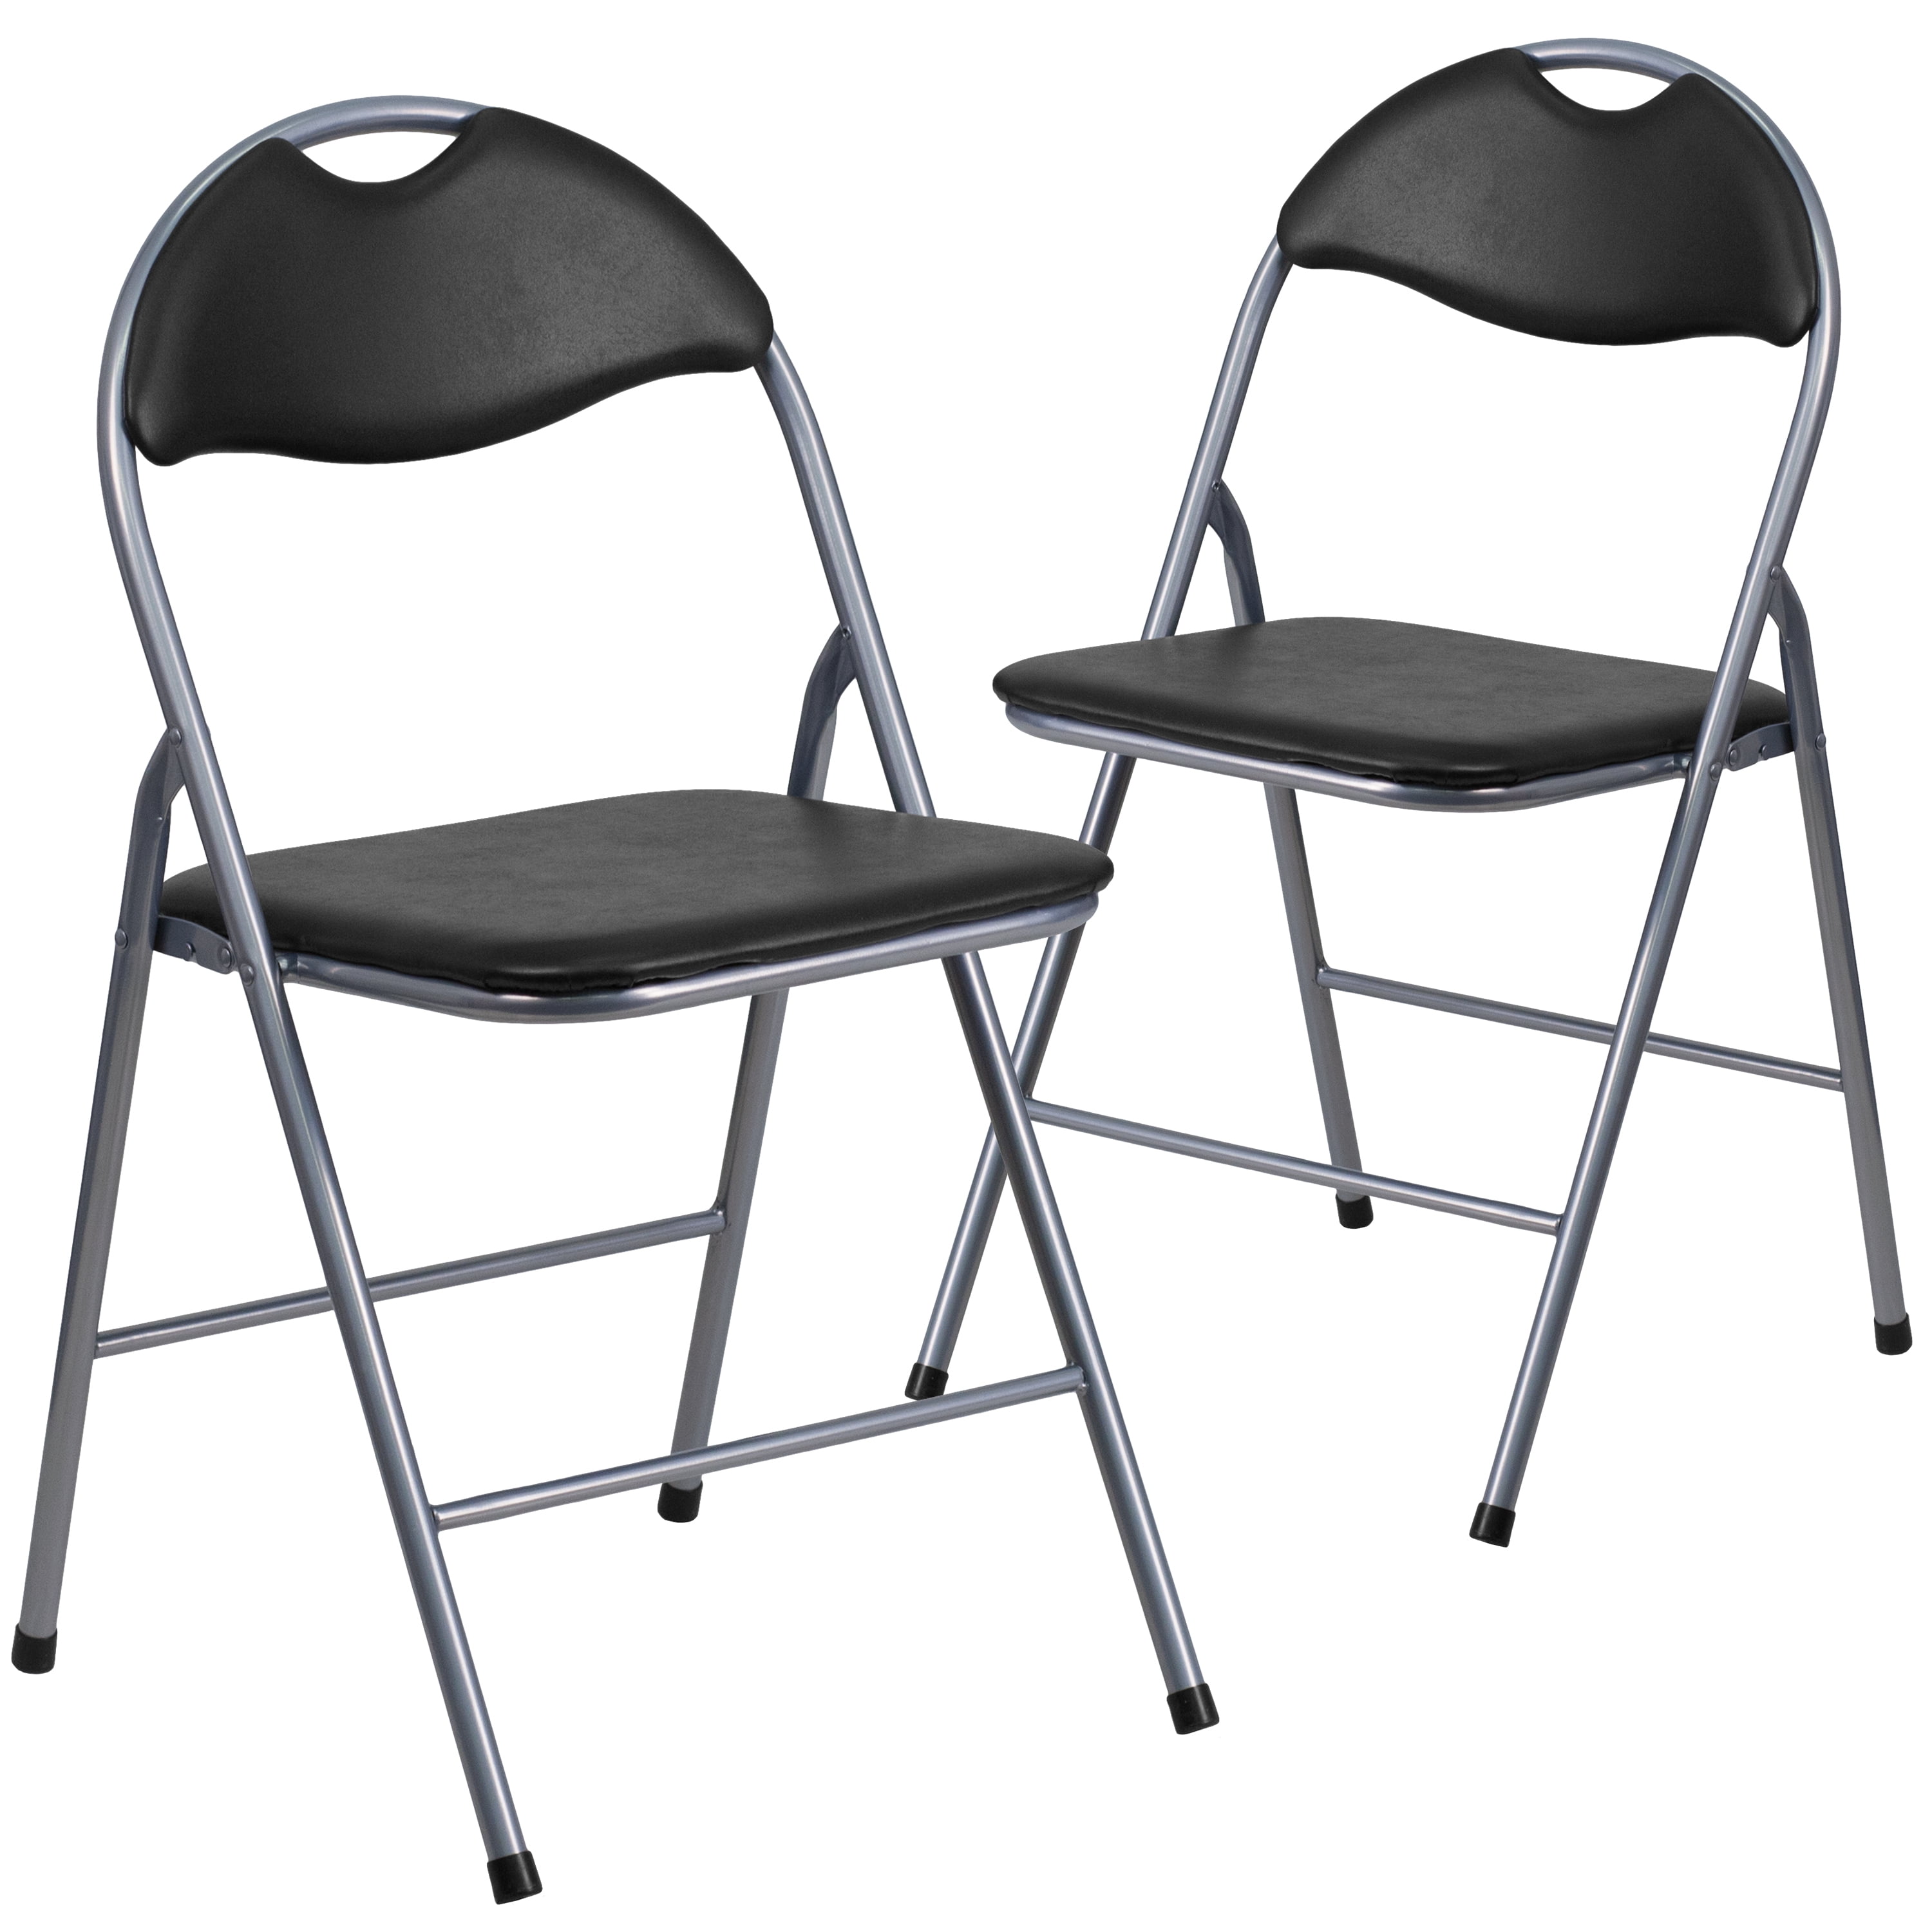 LOT OF 2 BLACK VINYL METAL FOLDING CHAIR WITH CARRYING HANDLE 